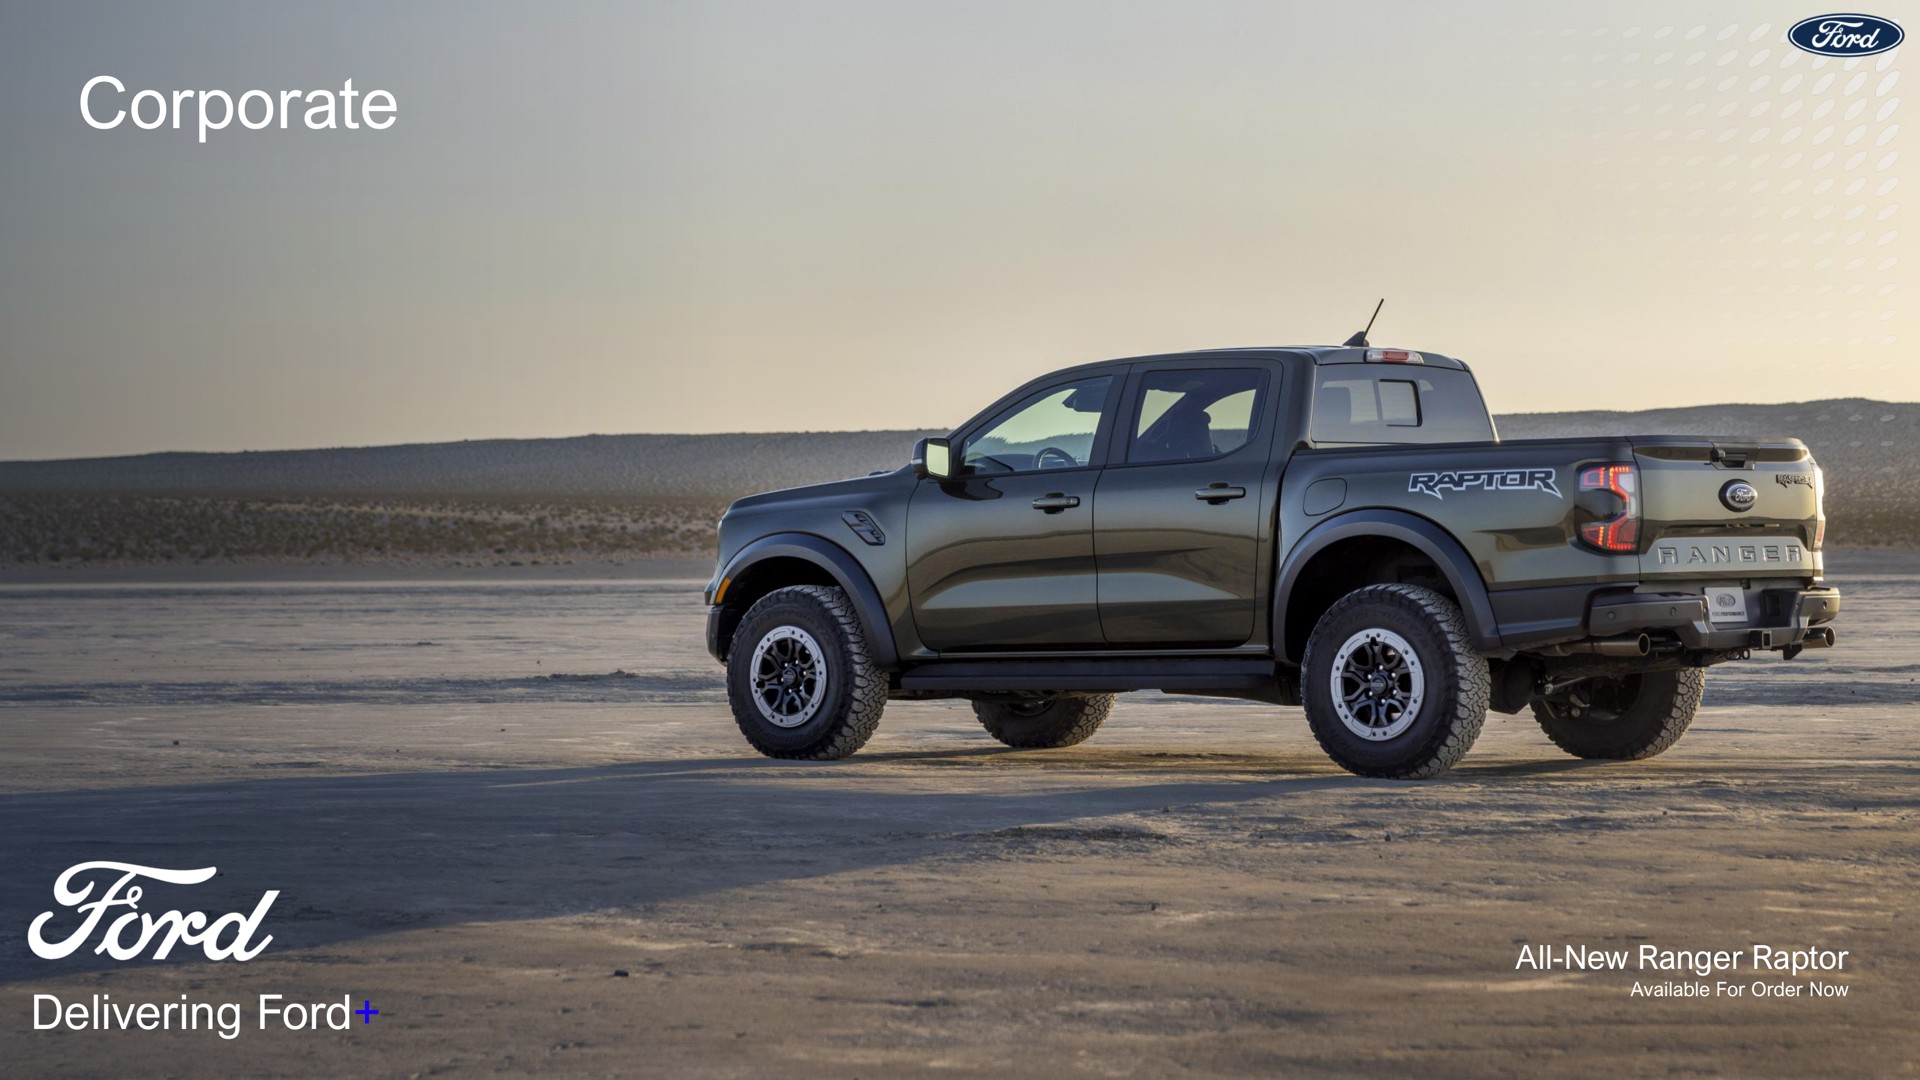 corporate delivering ford all new ranger raptor bee as | Ford